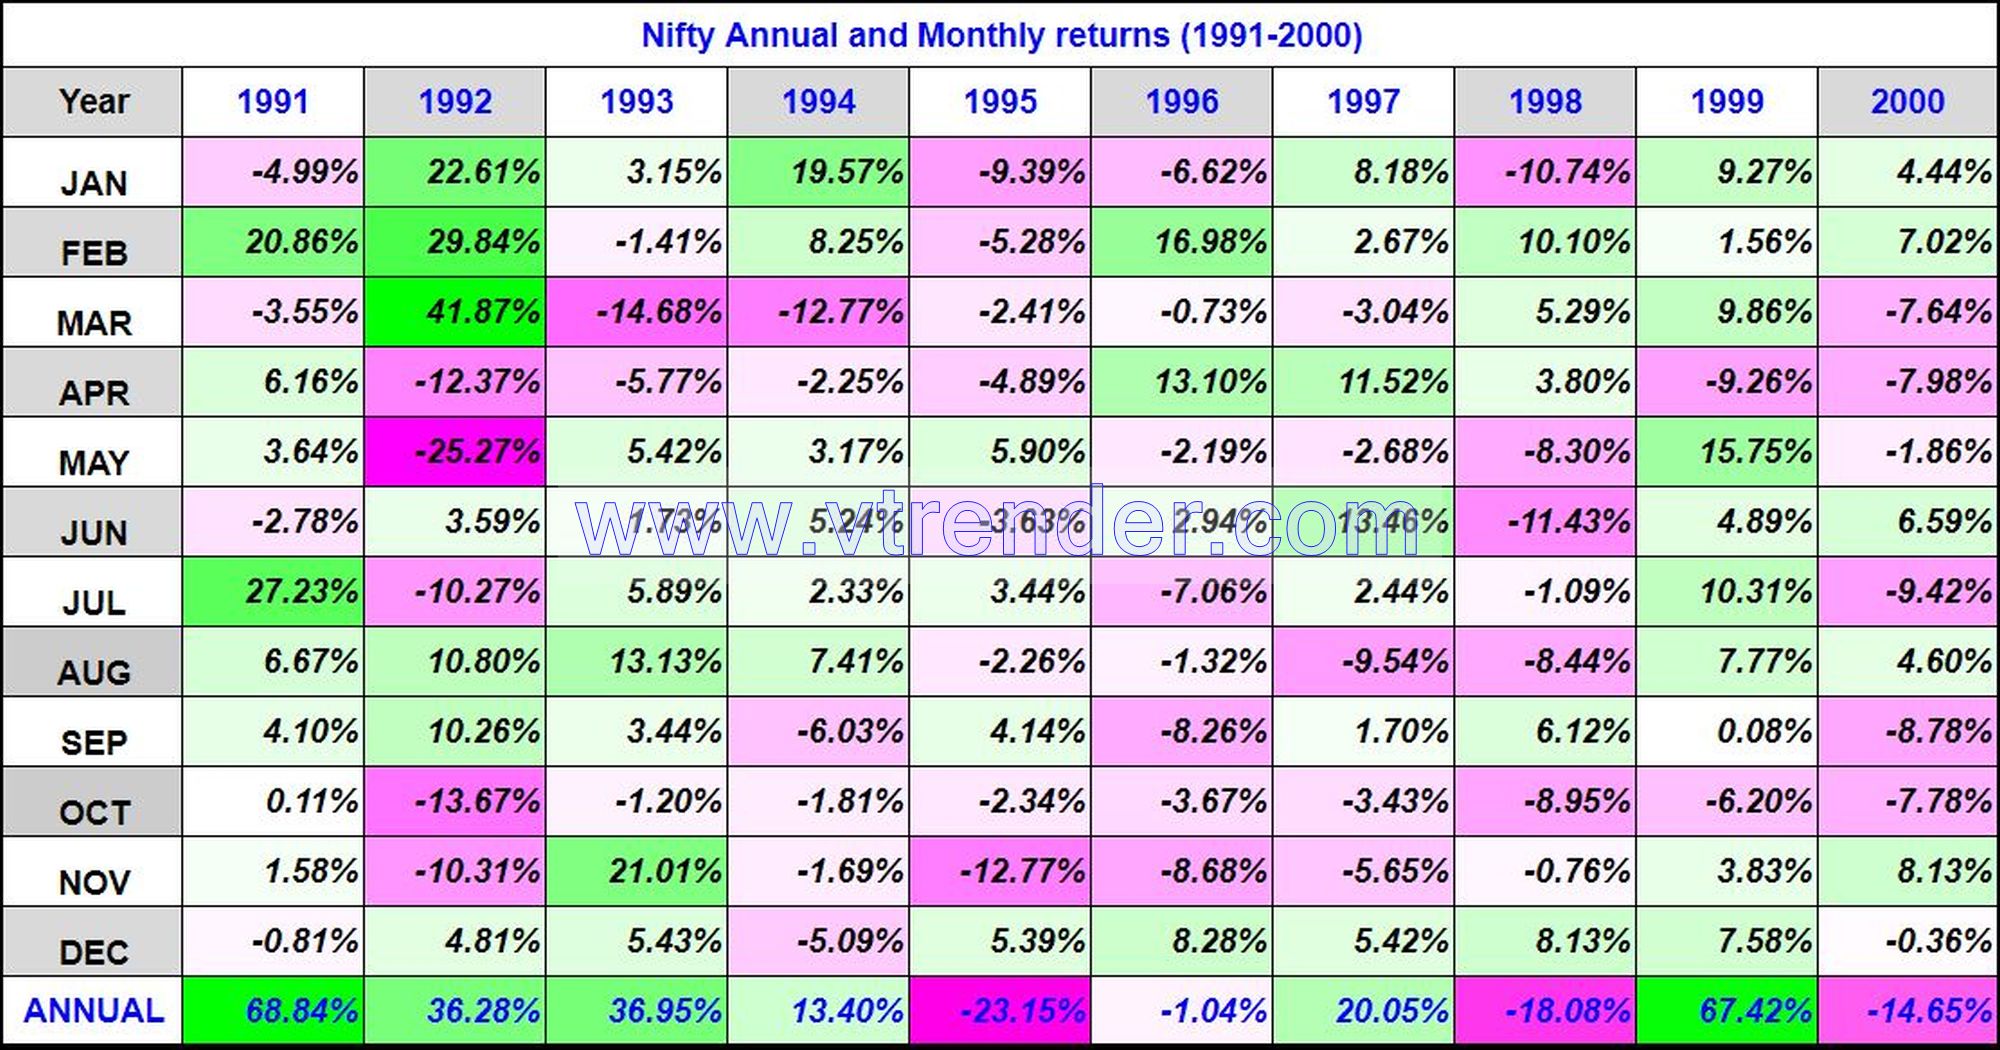 Niftyreturns1991 2000 Nifty 50 Monthly And Annual Returns (1991-2023) Updated 6Th Apr 2023 Annual, Monthly, Nifty Returns